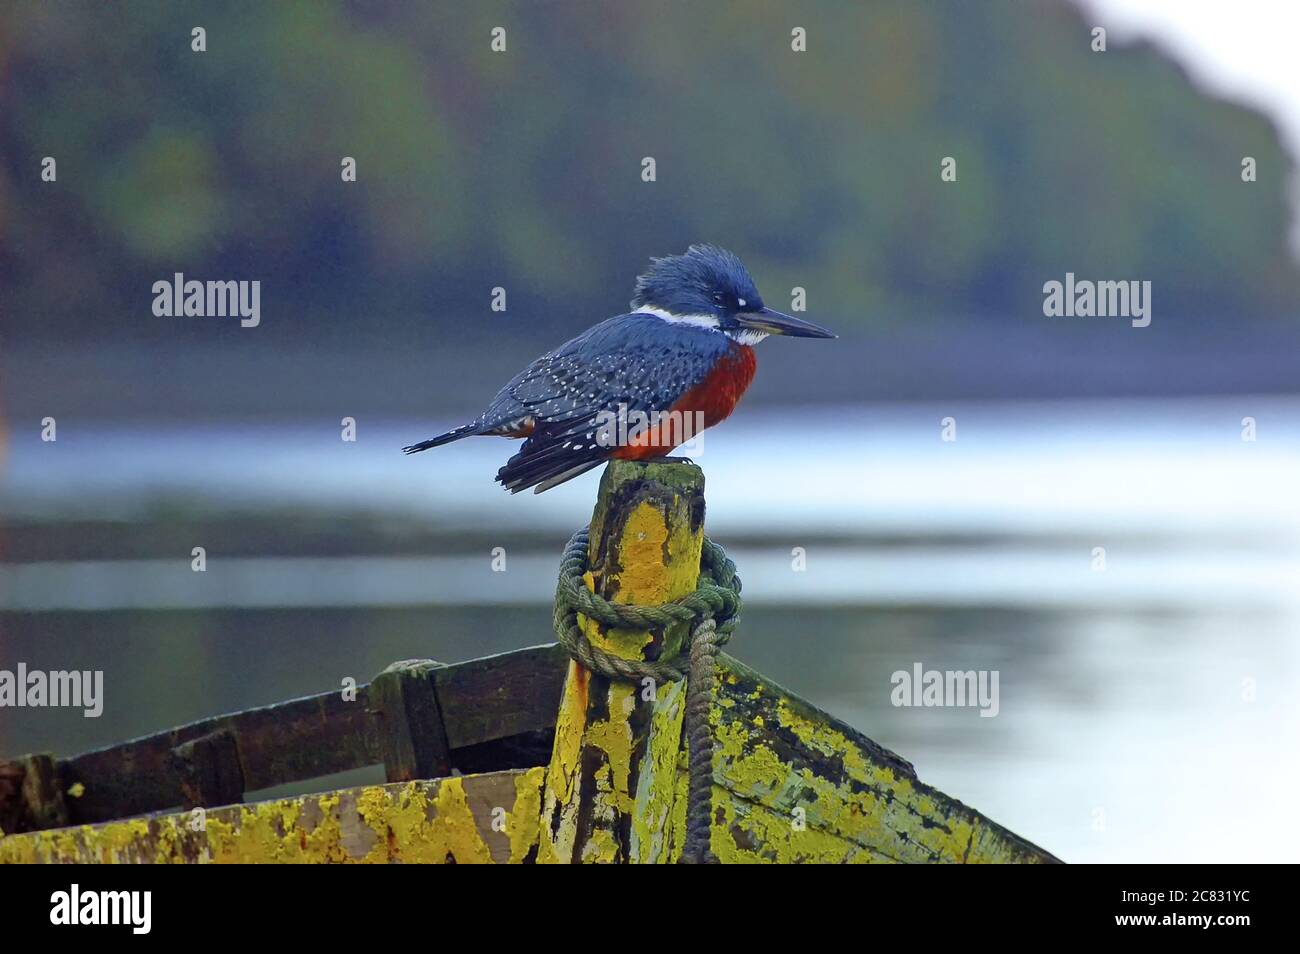 Selective focus shot of a cute belted kingfisher bird on a painted wooden fence Stock Photo